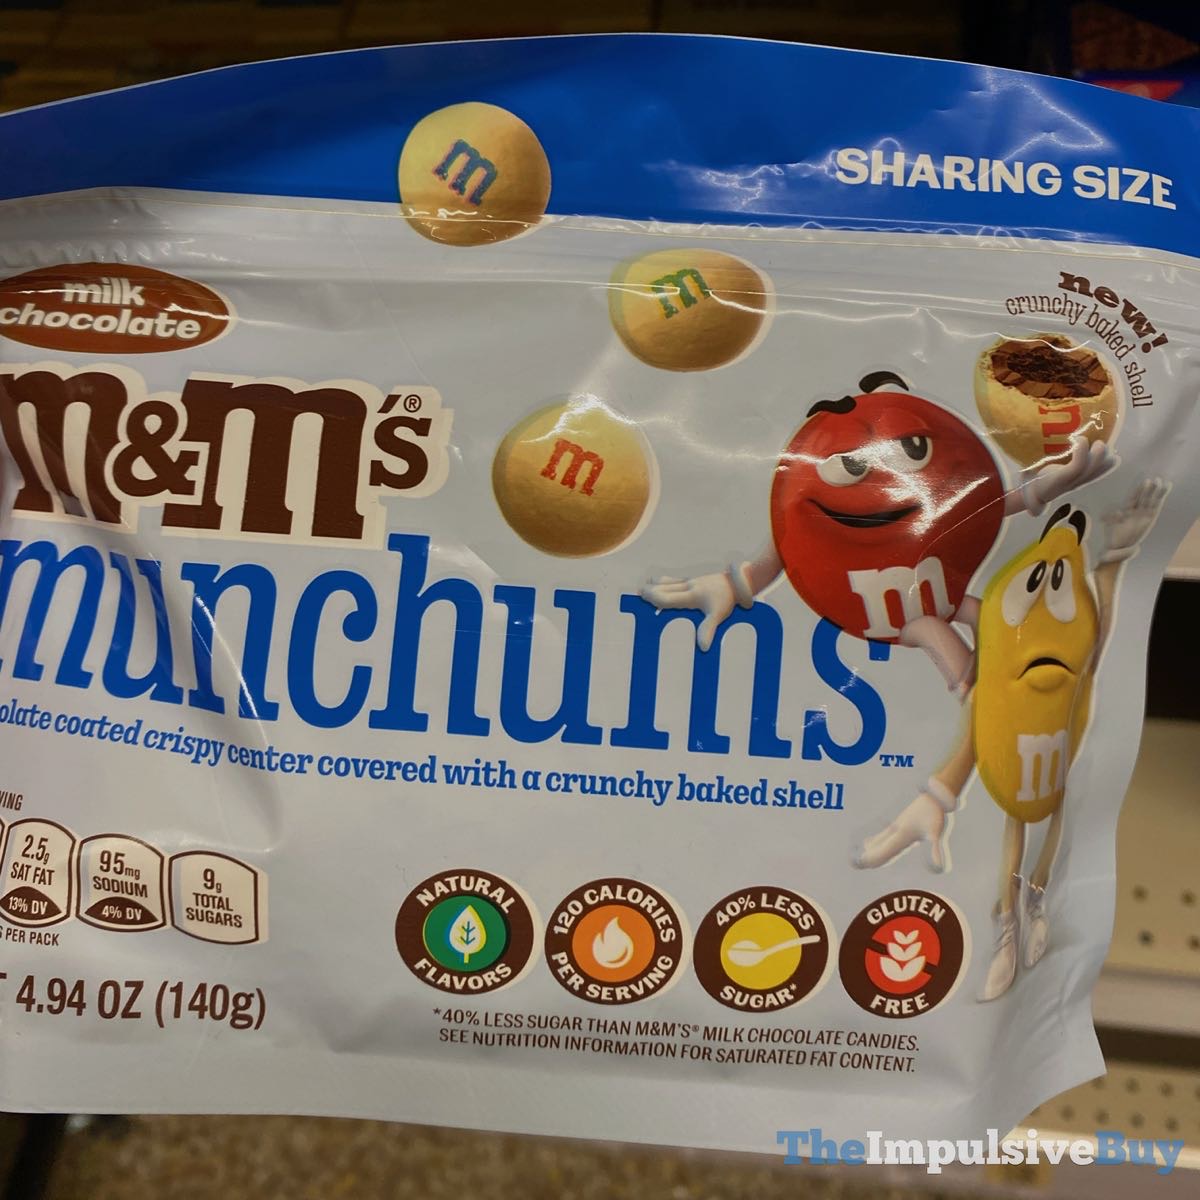 REVIEW: M&M's Munchums - The Impulsive Buy